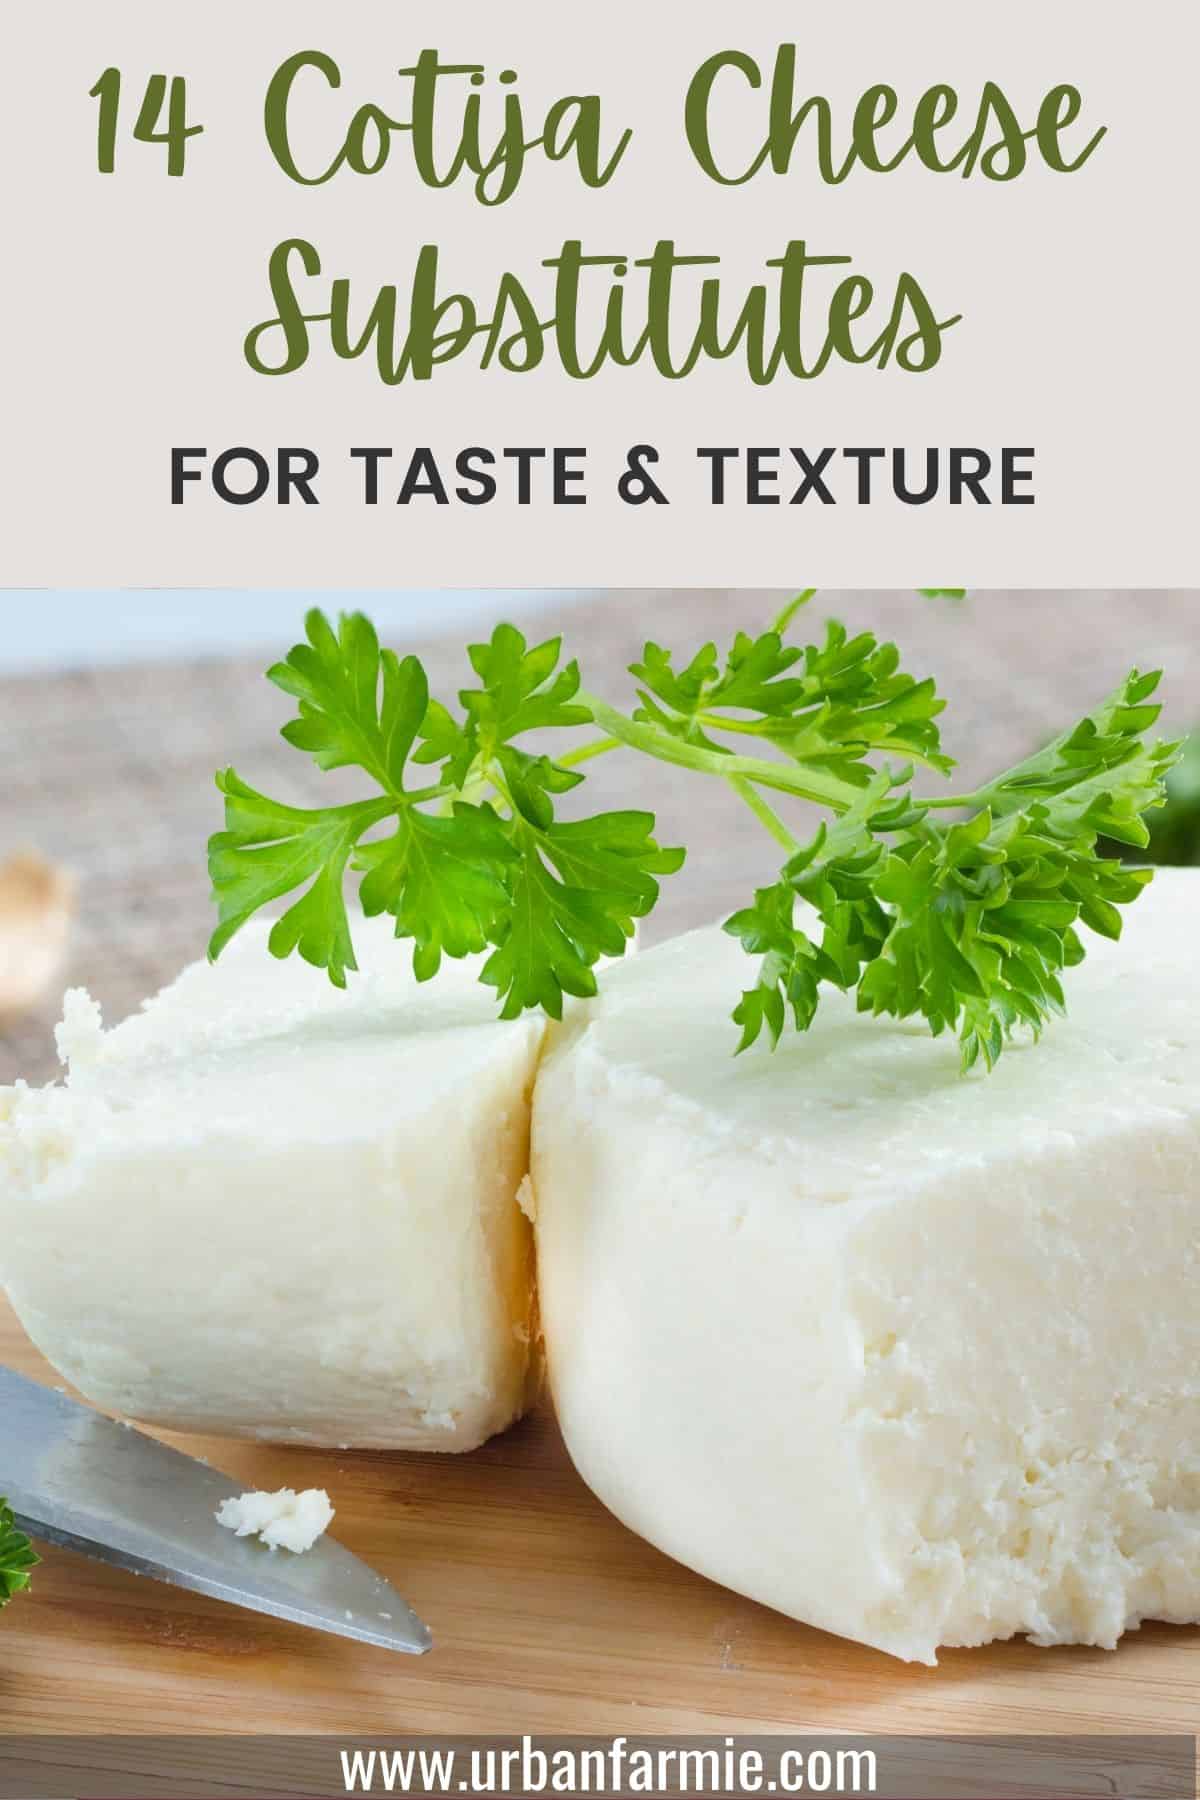 Image of block of cotija cheese with green garnish, and text overlay with title.